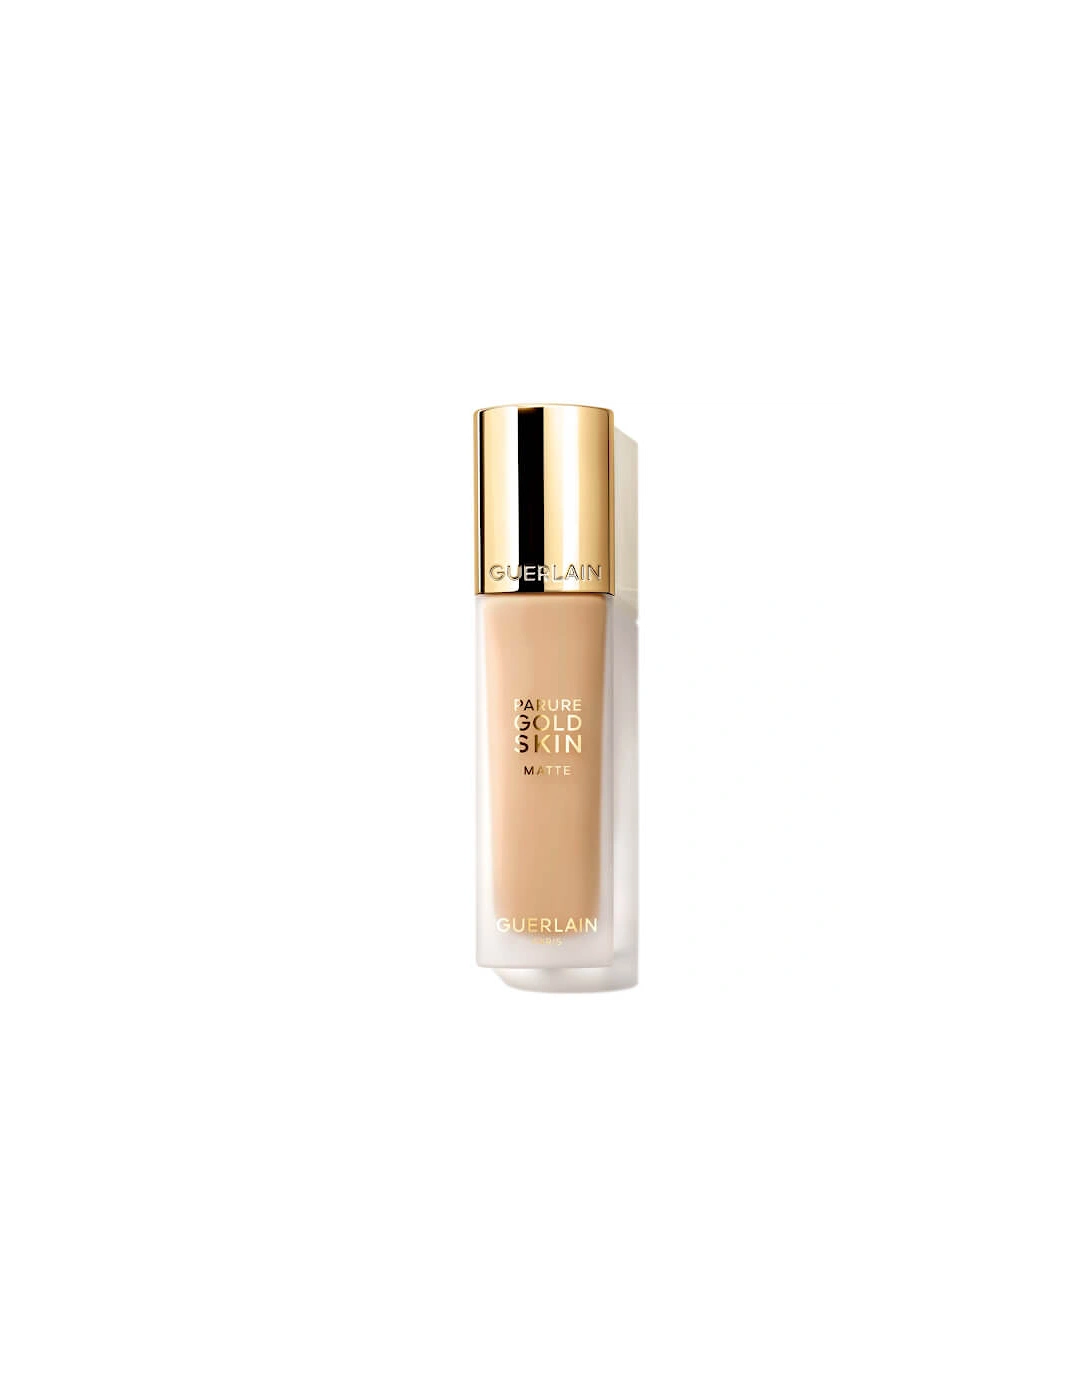 Parure Gold Skin 24H No-Transfer High Perfection Foundation - 3W Warm / Doré, 2 of 1